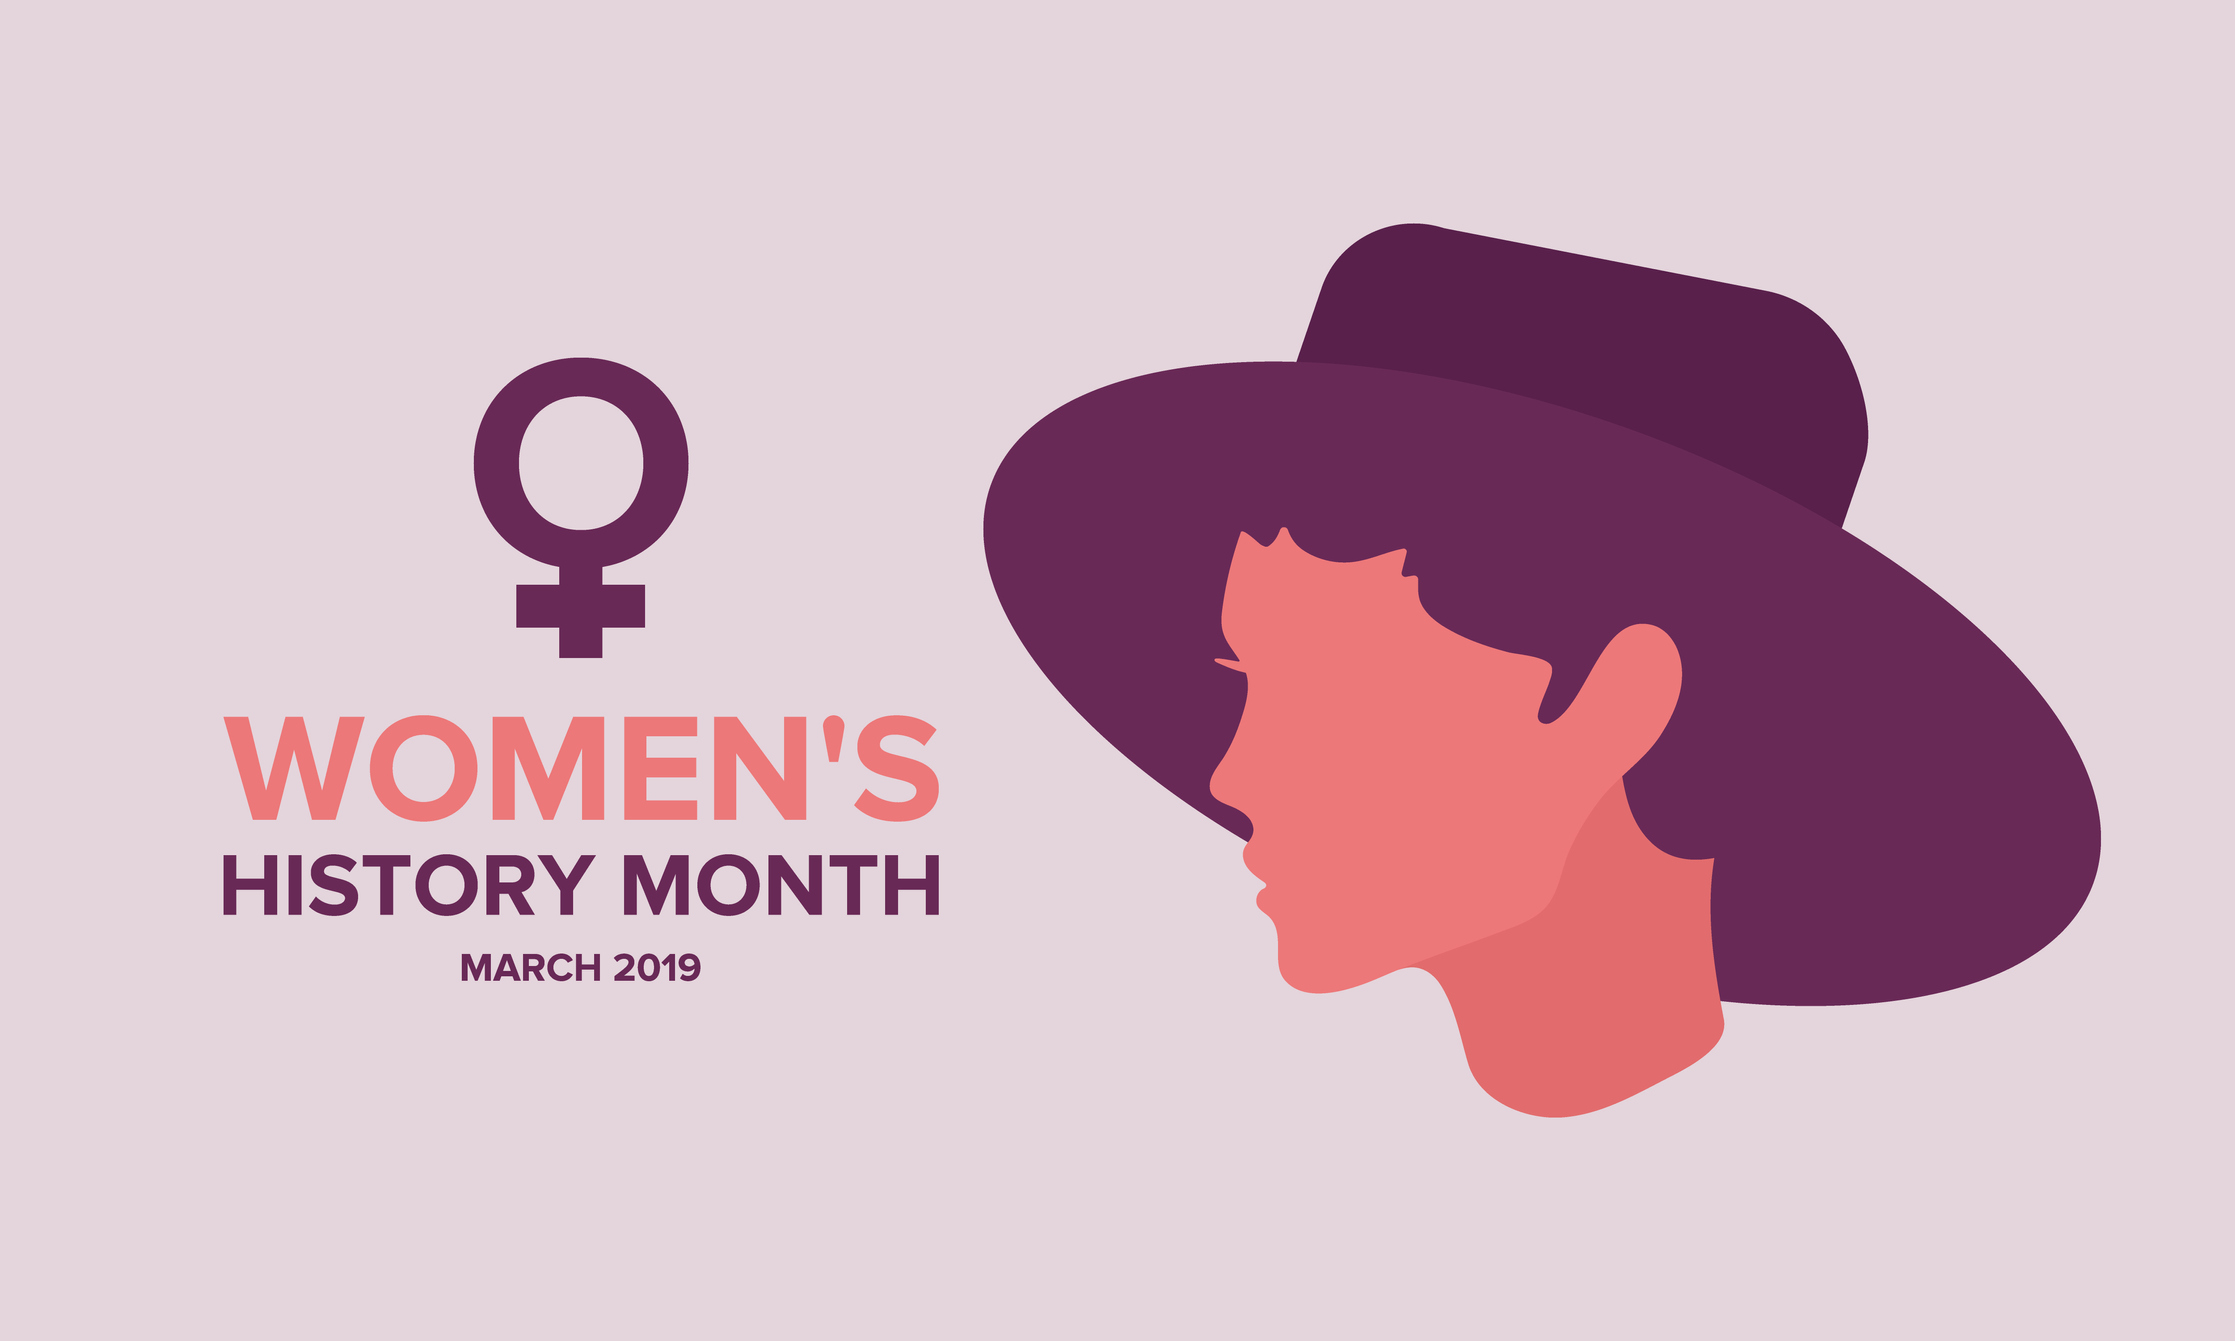 Women’s History Month 2019: Looking Back